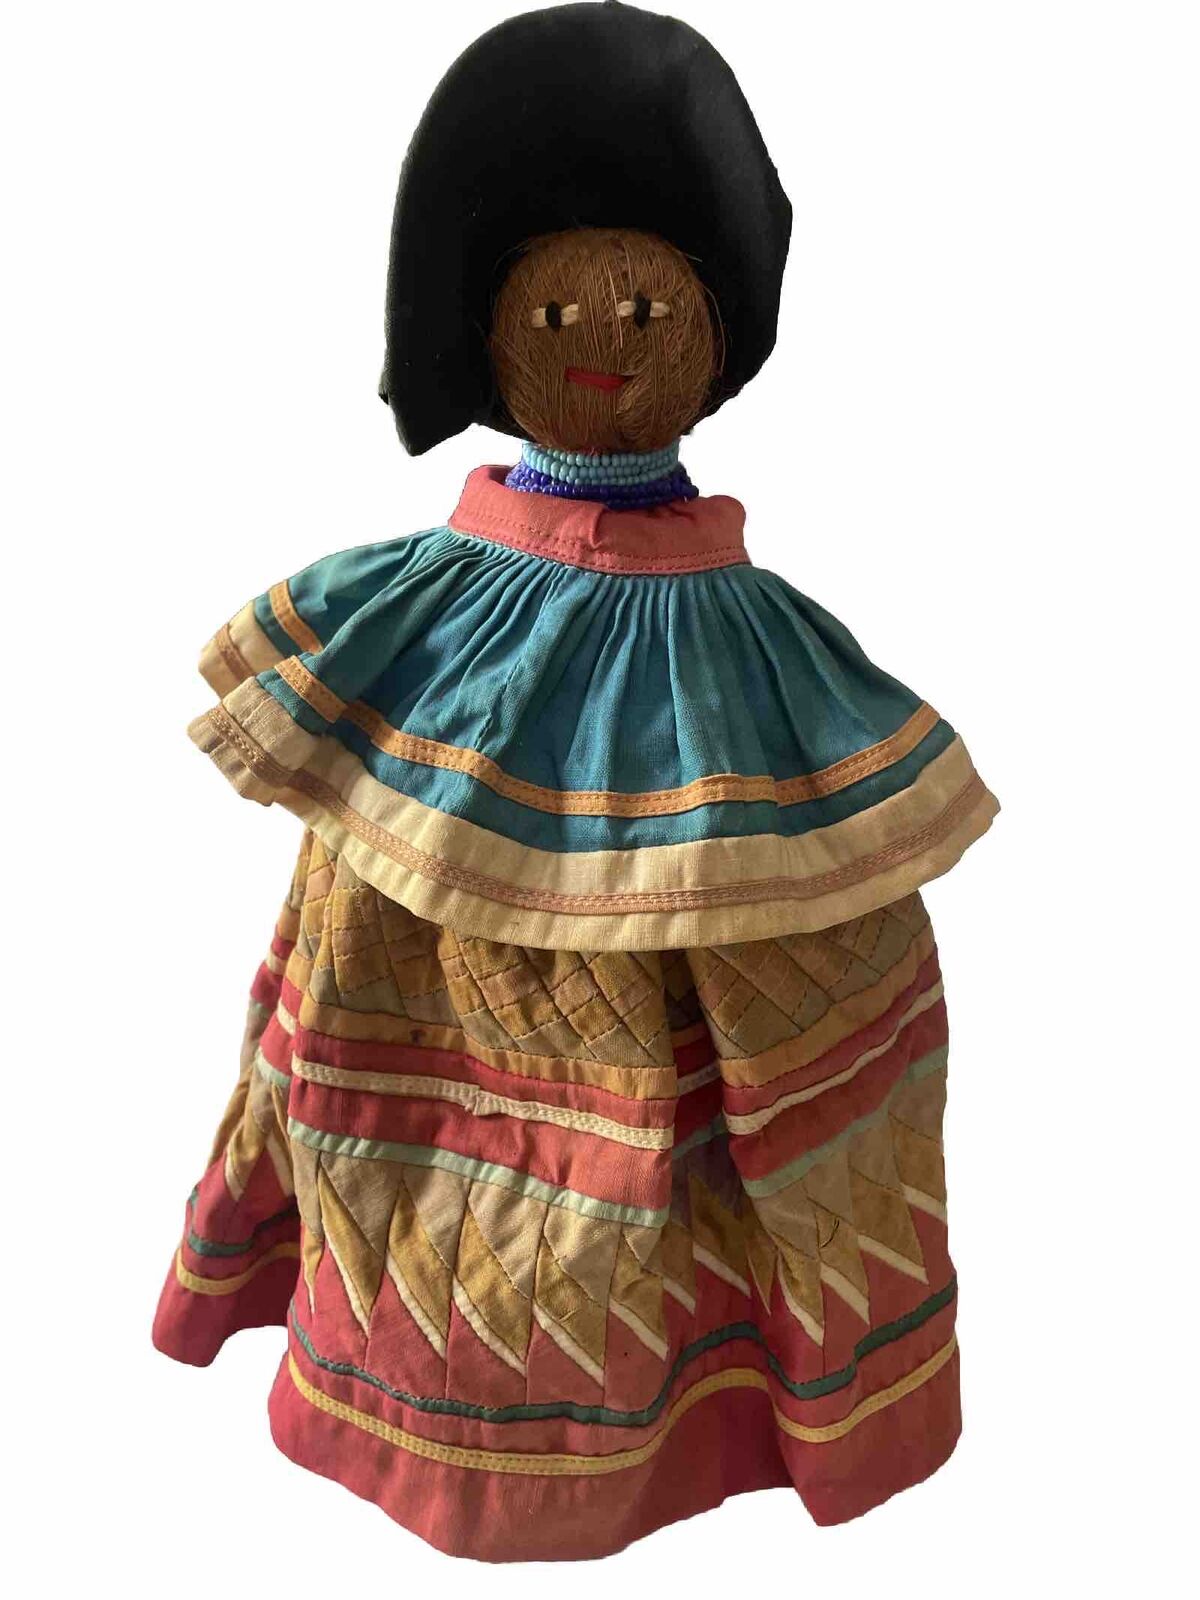 NATIVE AMERICAN VINTAGE SEMINOLE patchwork doll Quilted Skirt Dress Beads